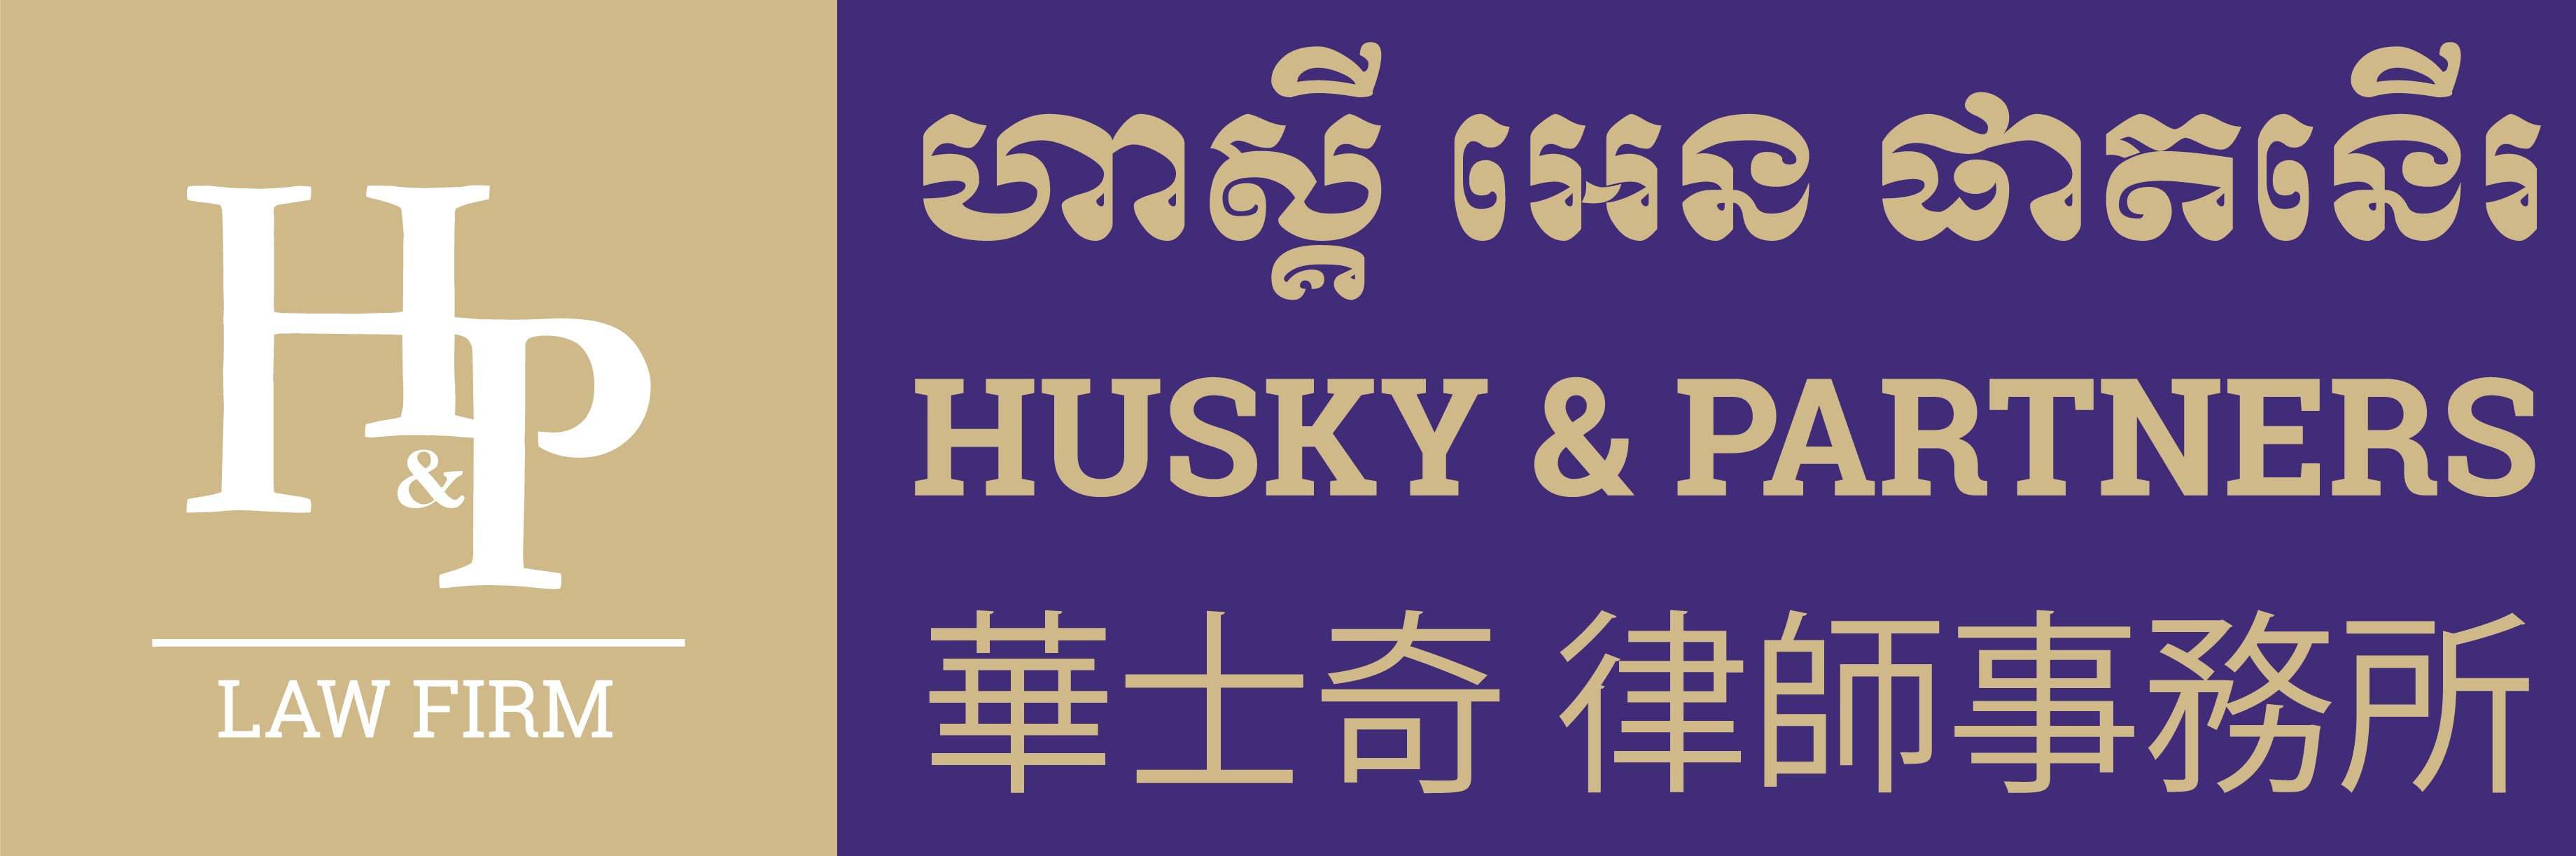 Husky & Partners Law Firm | Cambodia